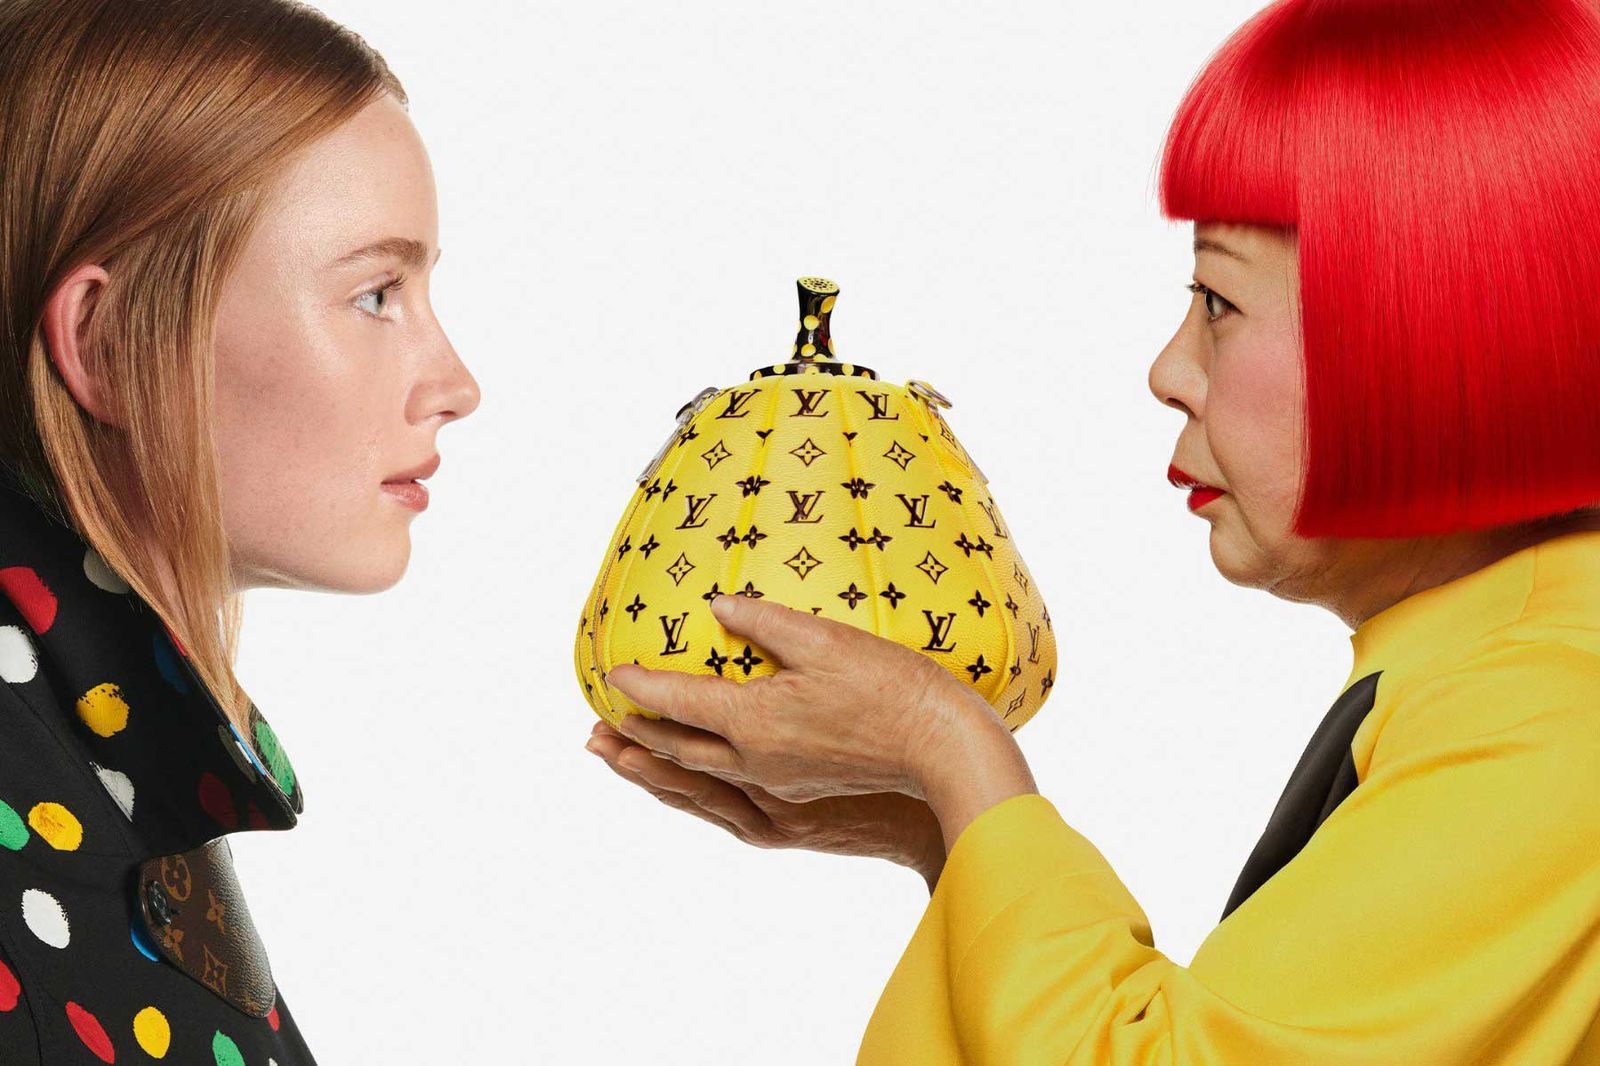 Louis-vuitton-x-Yayoi-Kusama-capsule-collection-part-2-the-impression-010.jpg